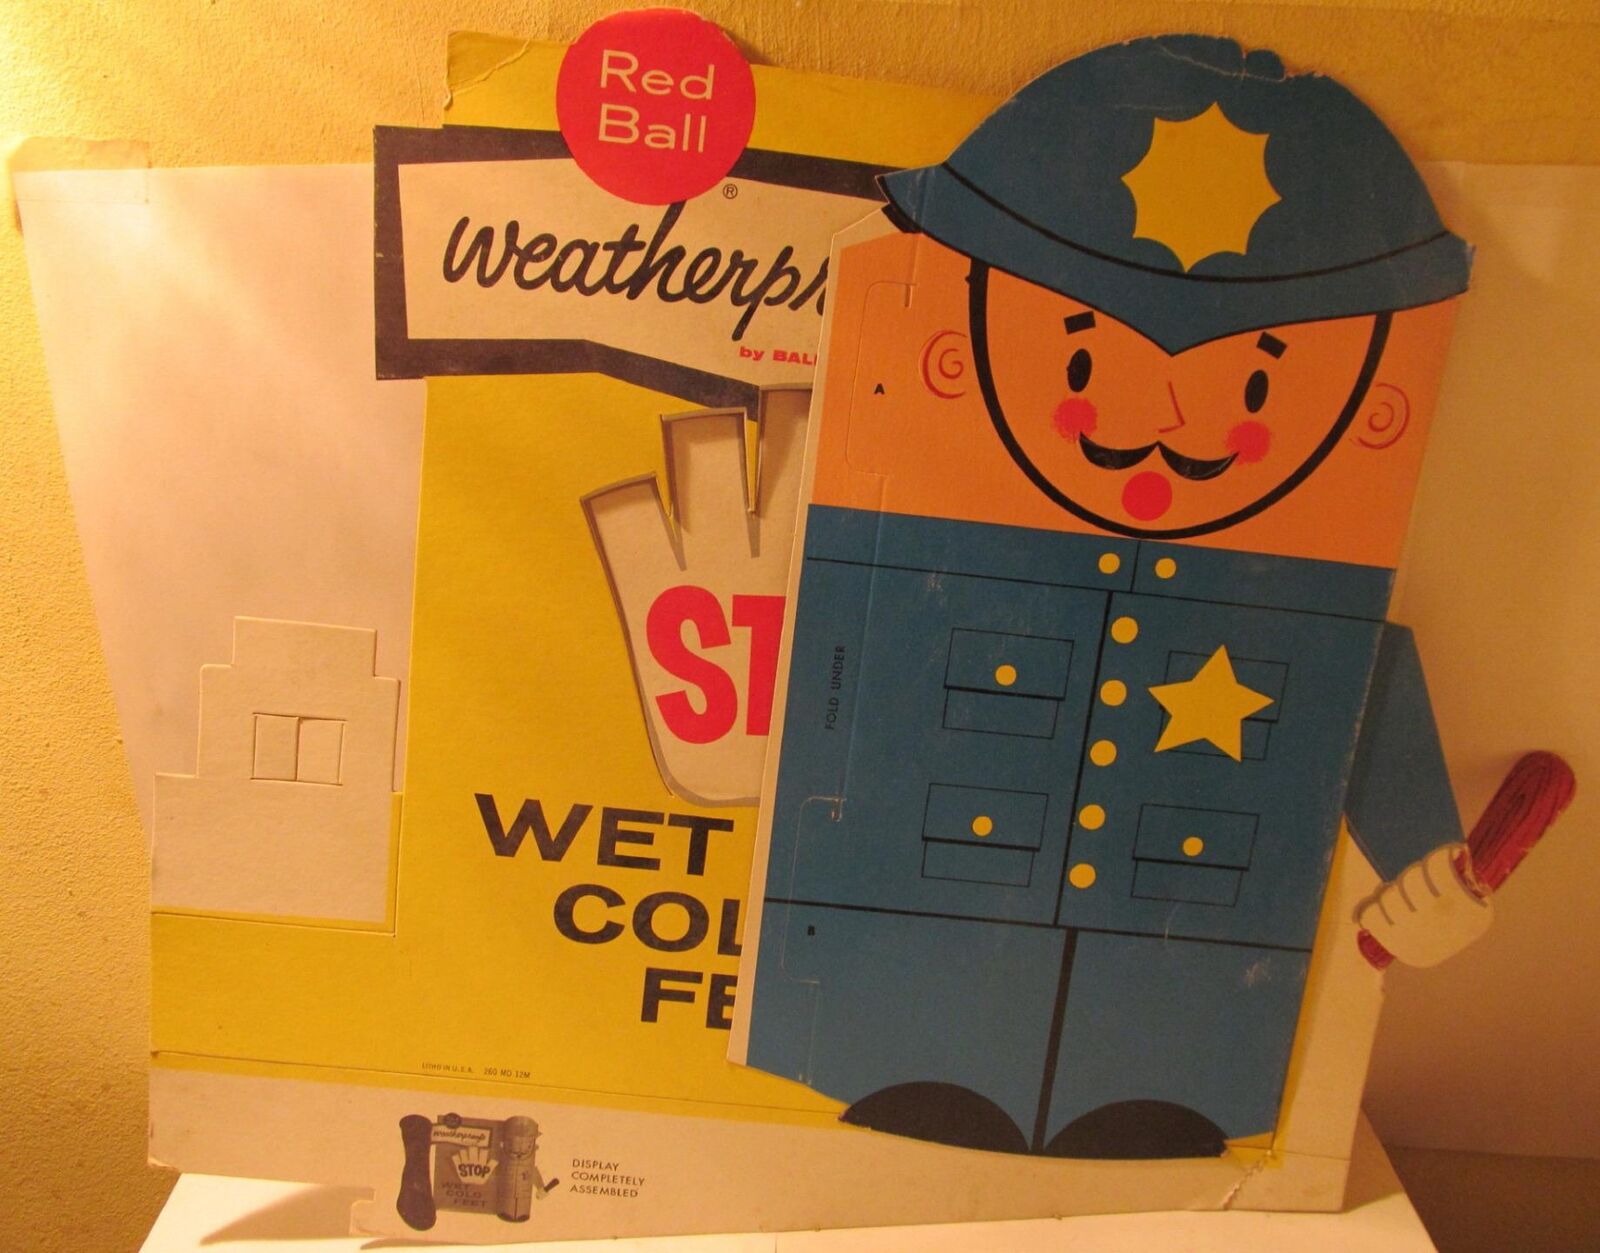 Red Ball Footwear Cardboard Ball Band Shoe Store - Weatherproofs Ad Sign 1950s